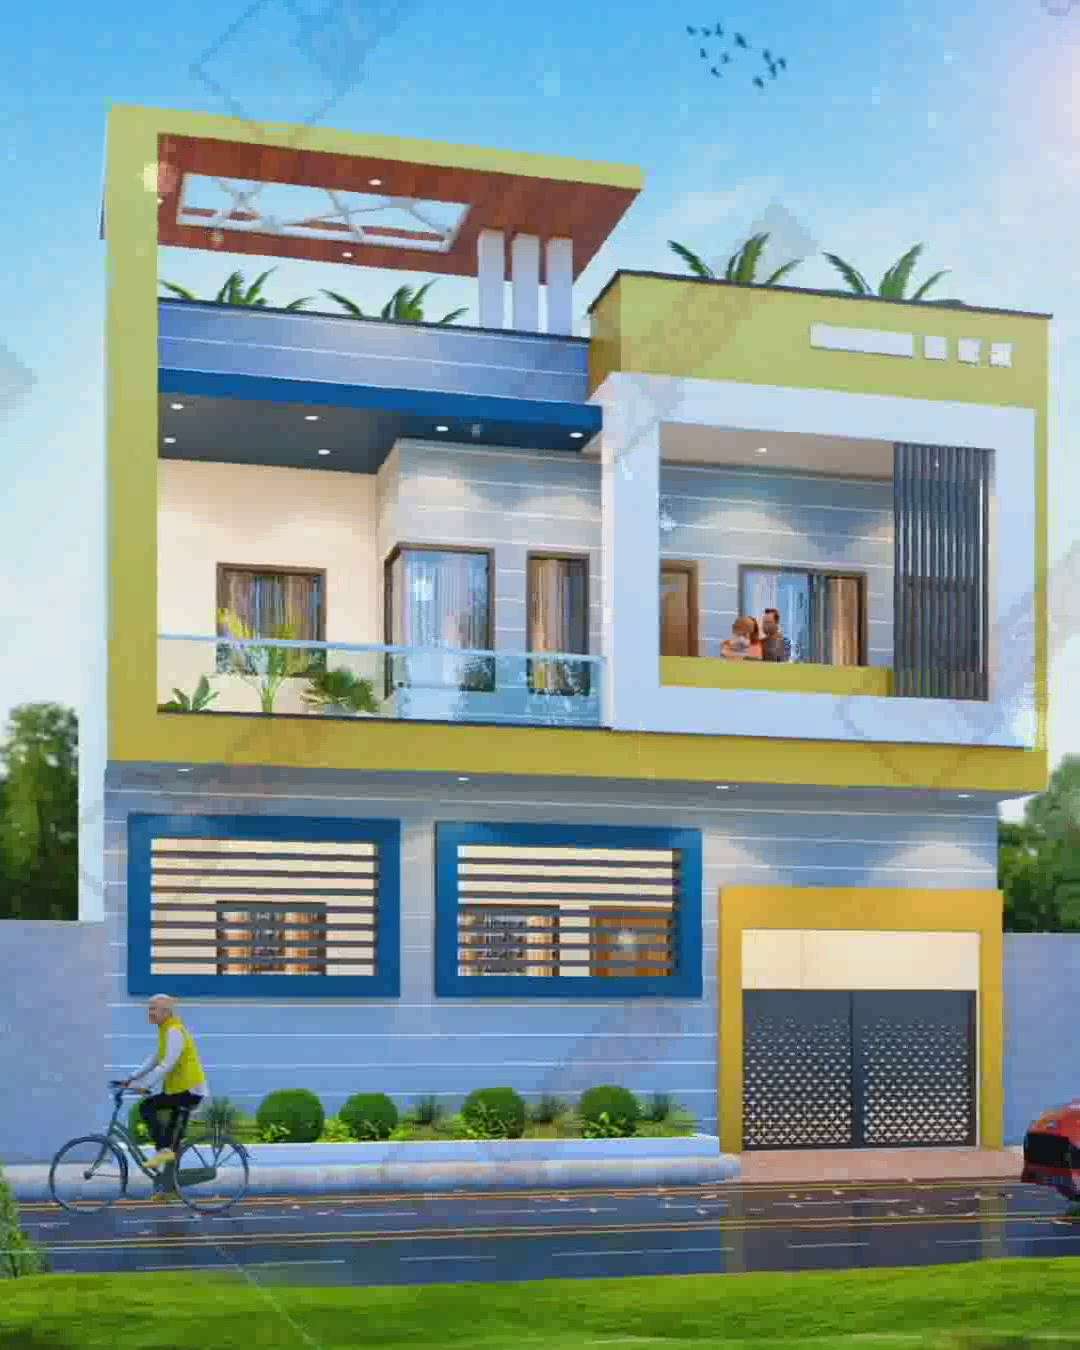 #HouseDesigns #Architect #architecturedesigns